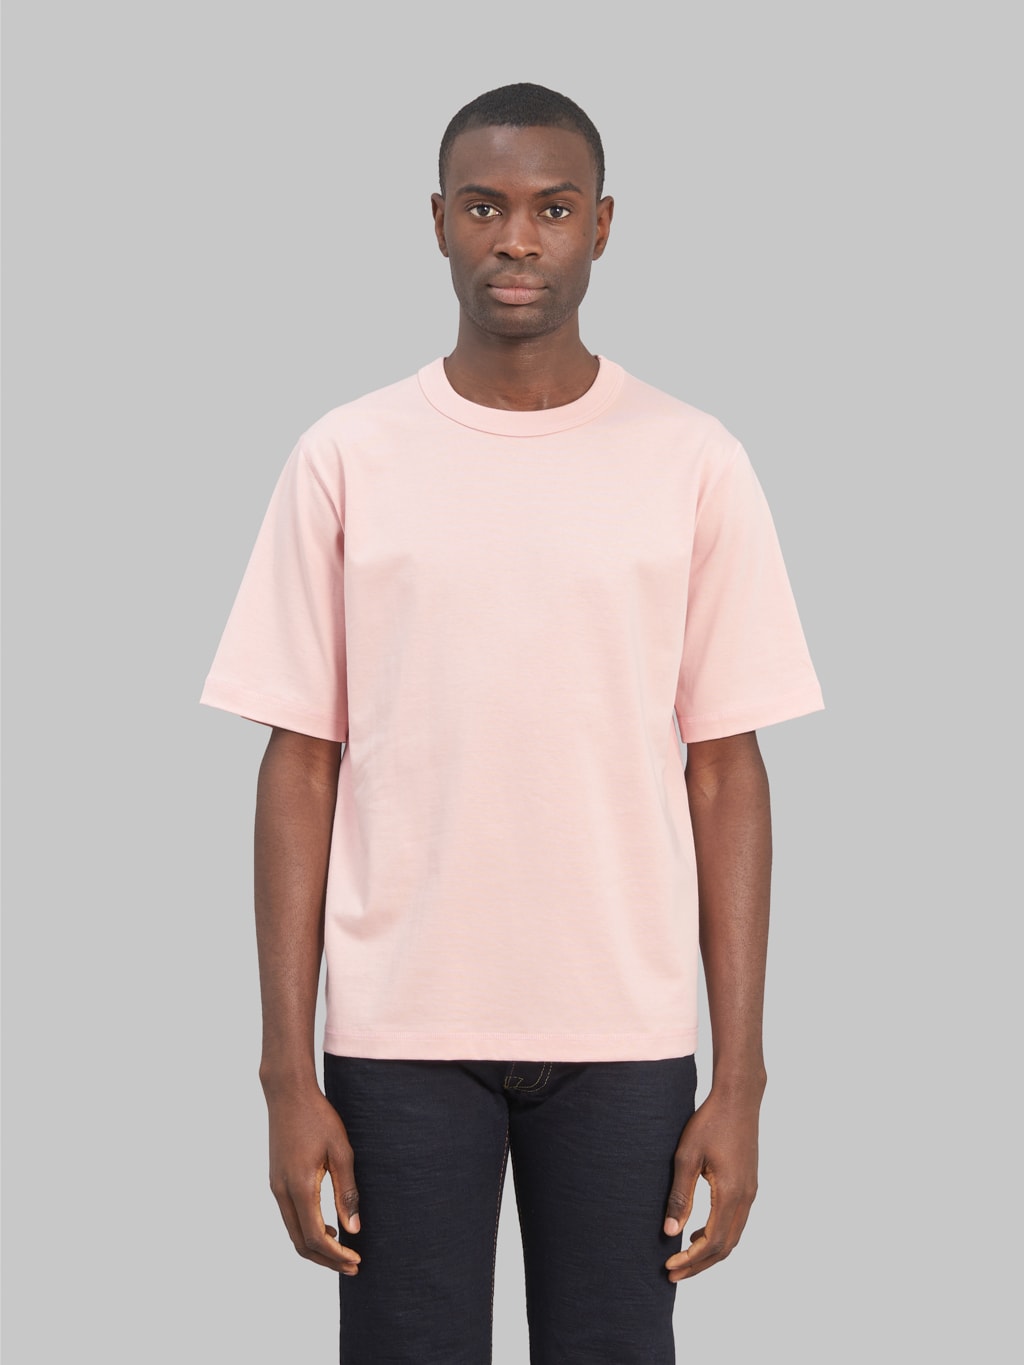 jackman grace tshirt baby pink model front fit